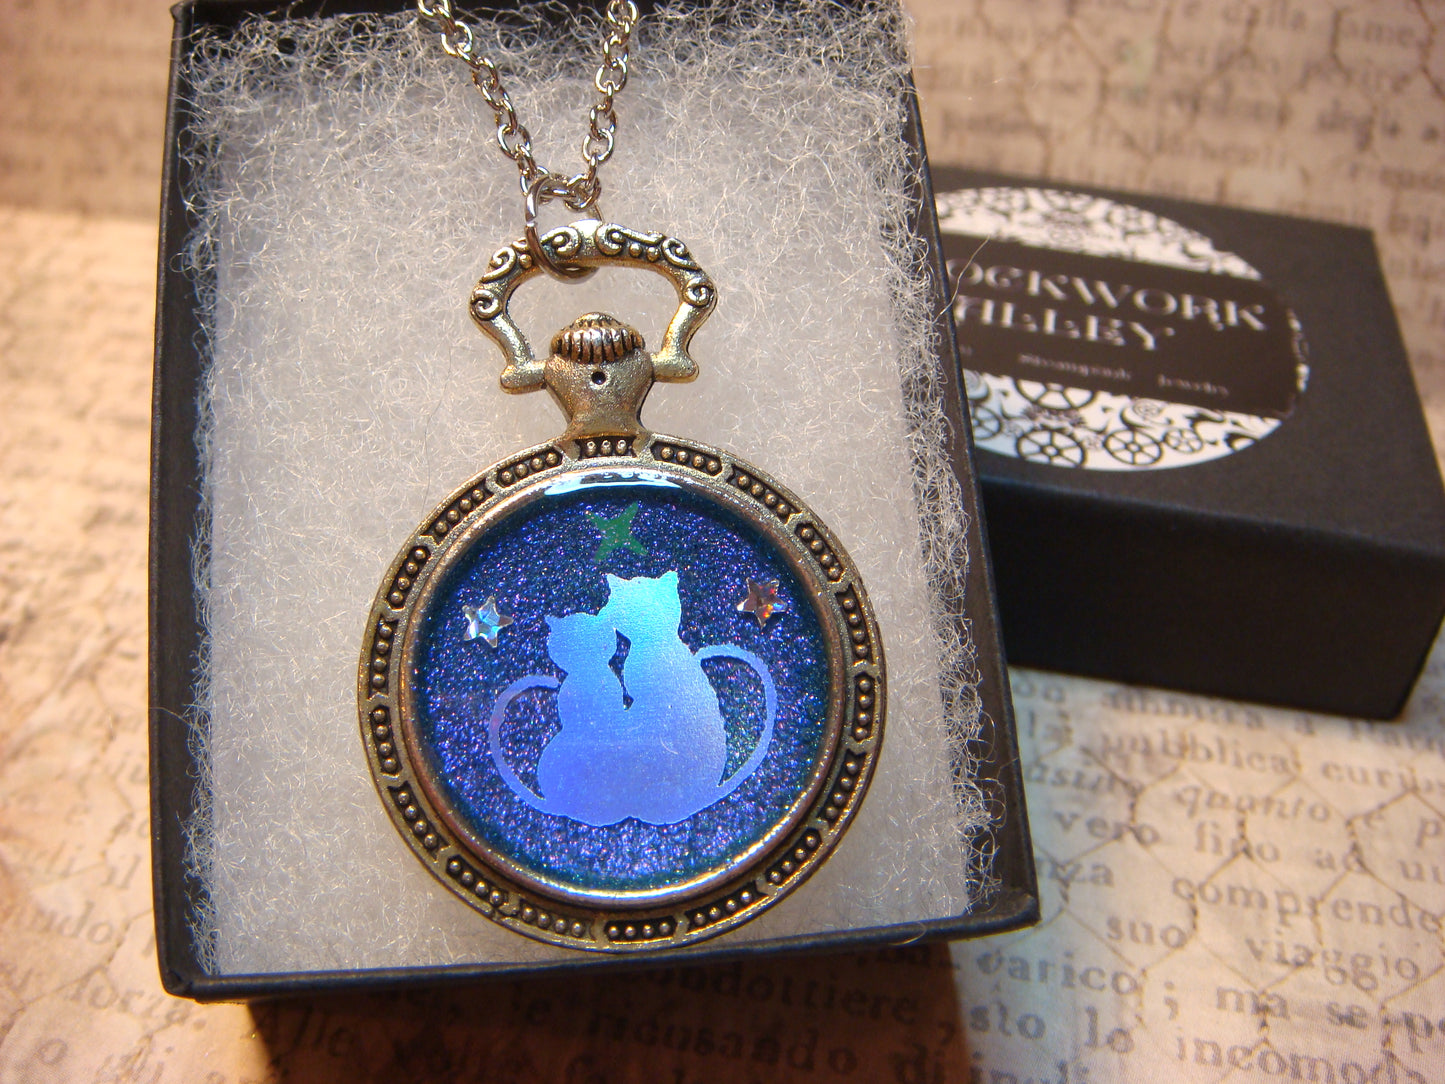 Snuggling Cats with Stars Pocket Watch Pendant Necklace